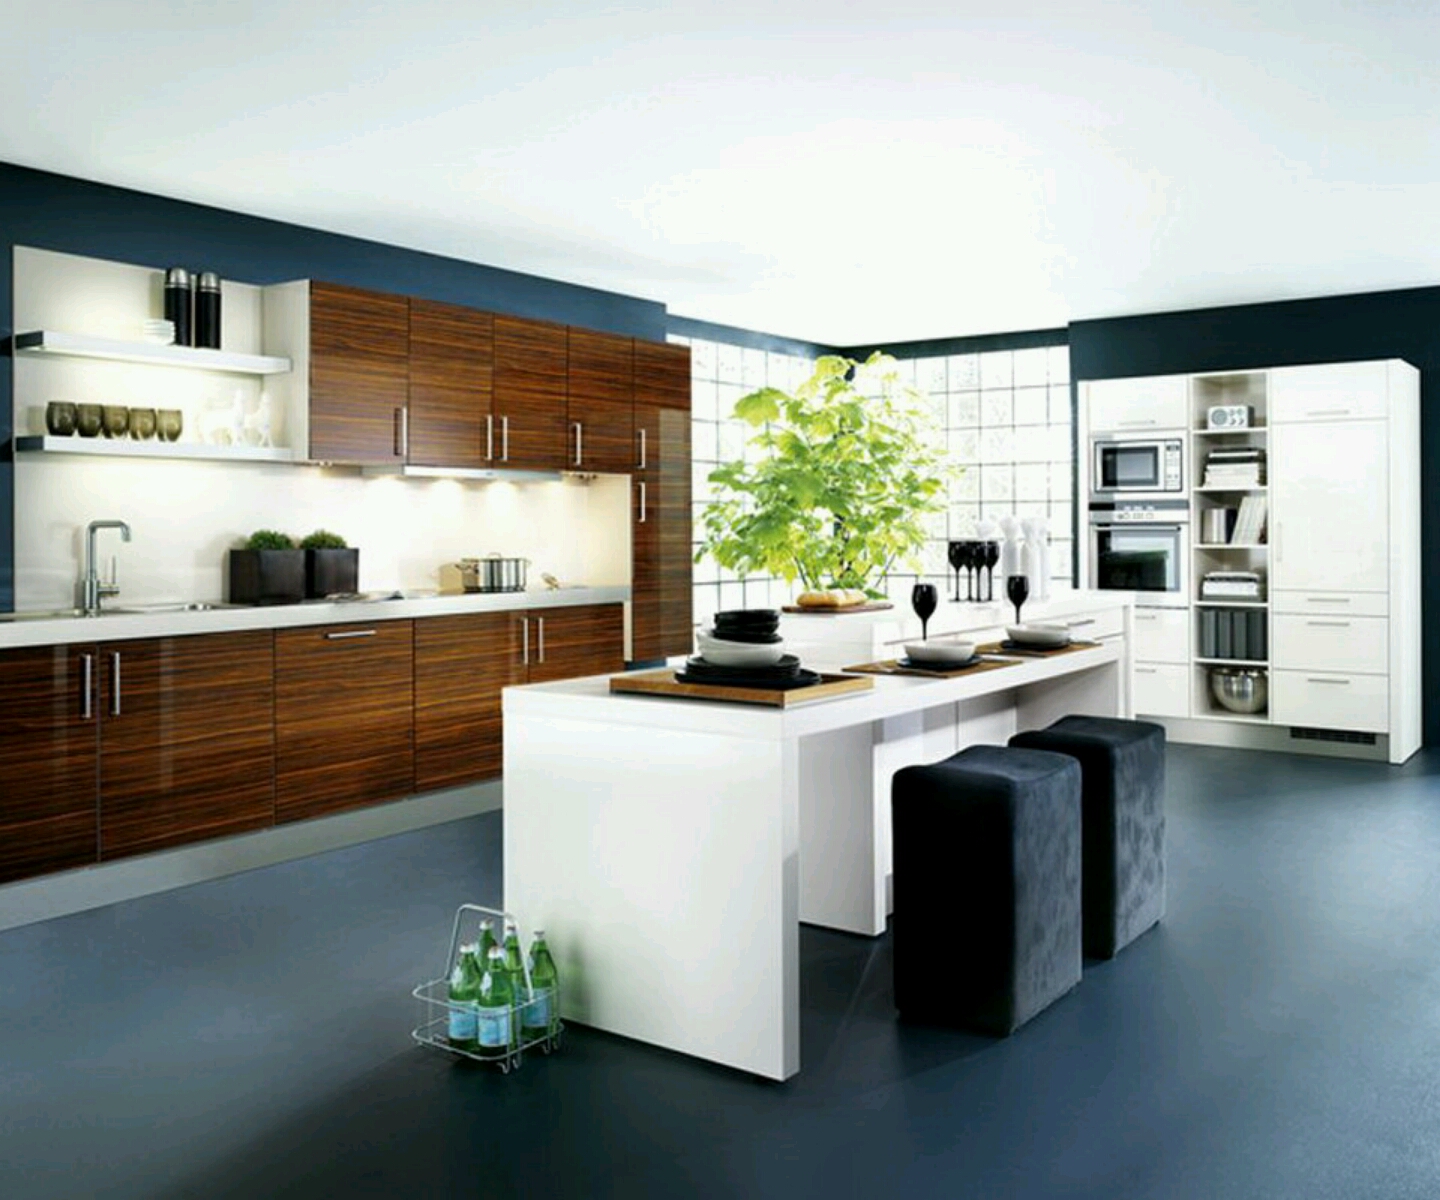 New home designs latest.: Kitchen cabinets designs modern homes.